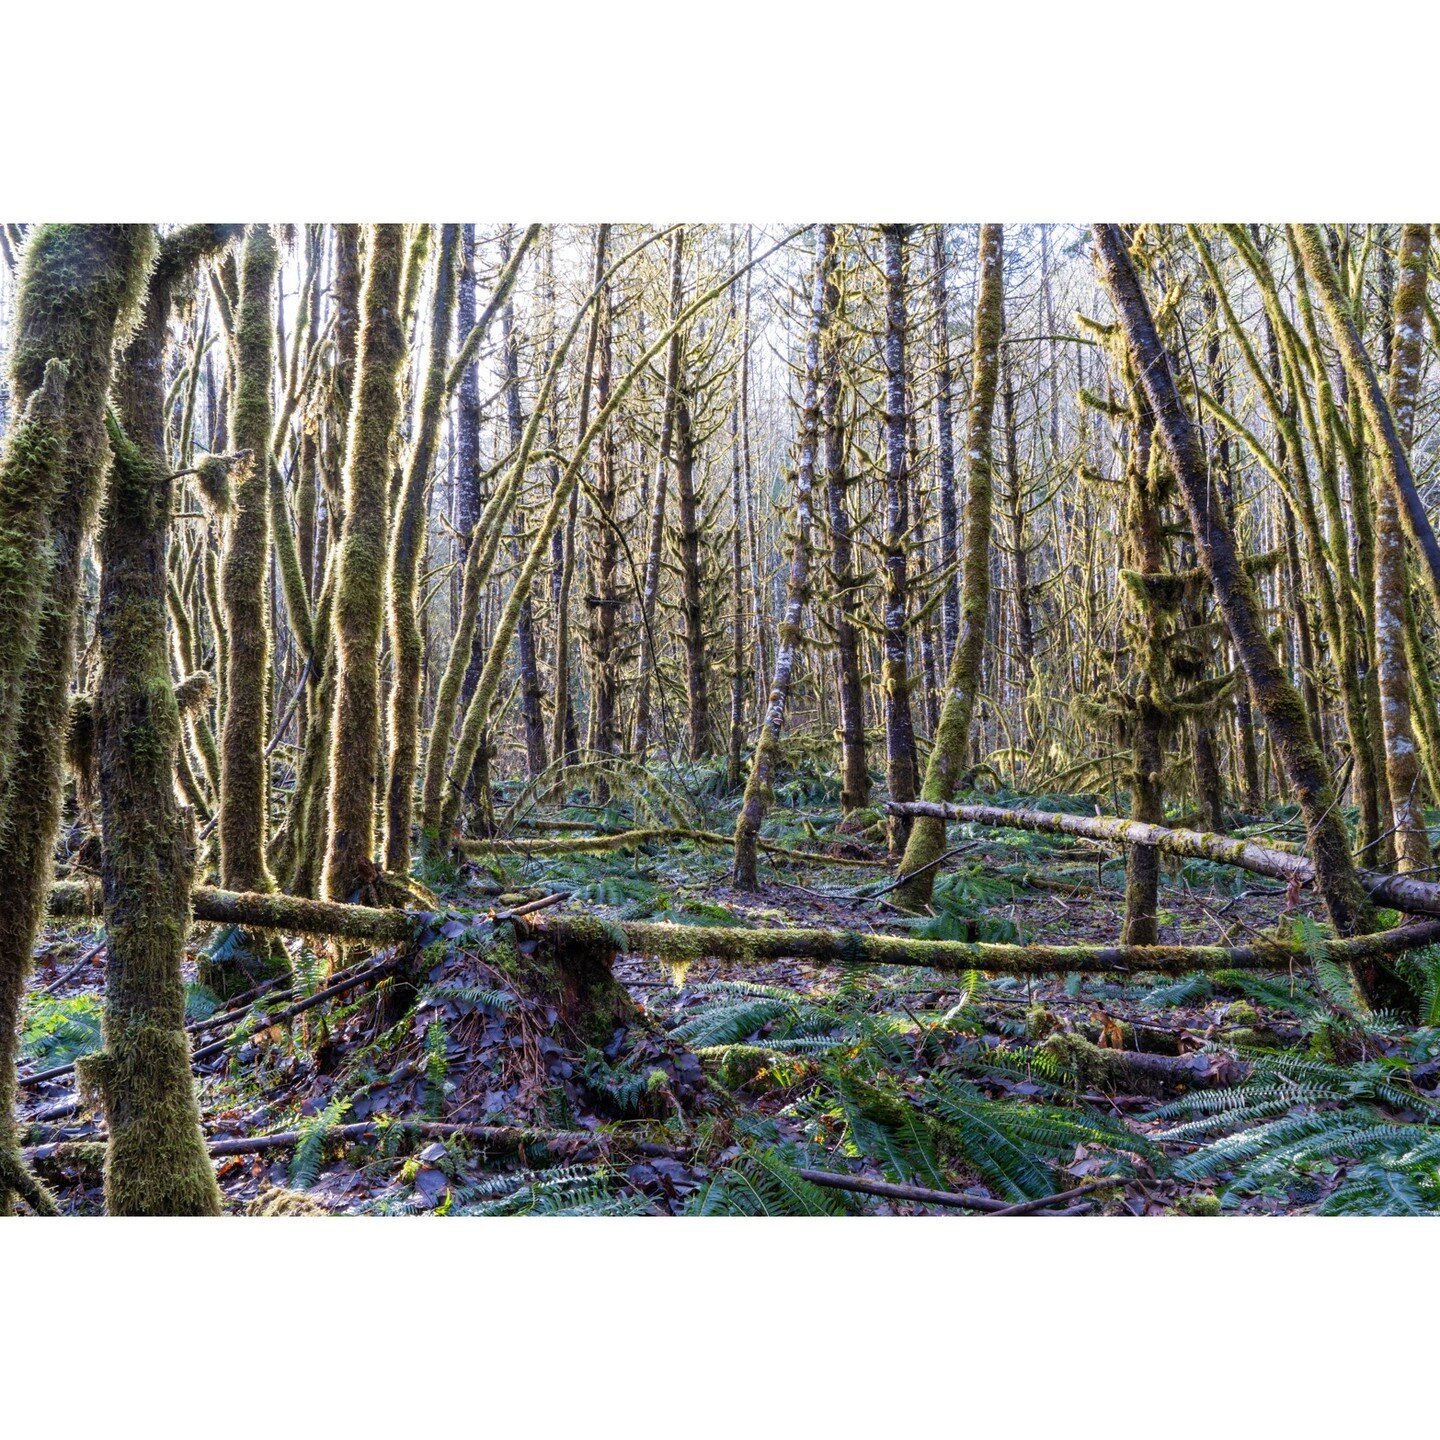 mossy trees, in the North Cascades, in the morning light
.
#mosssytrees #northcascades